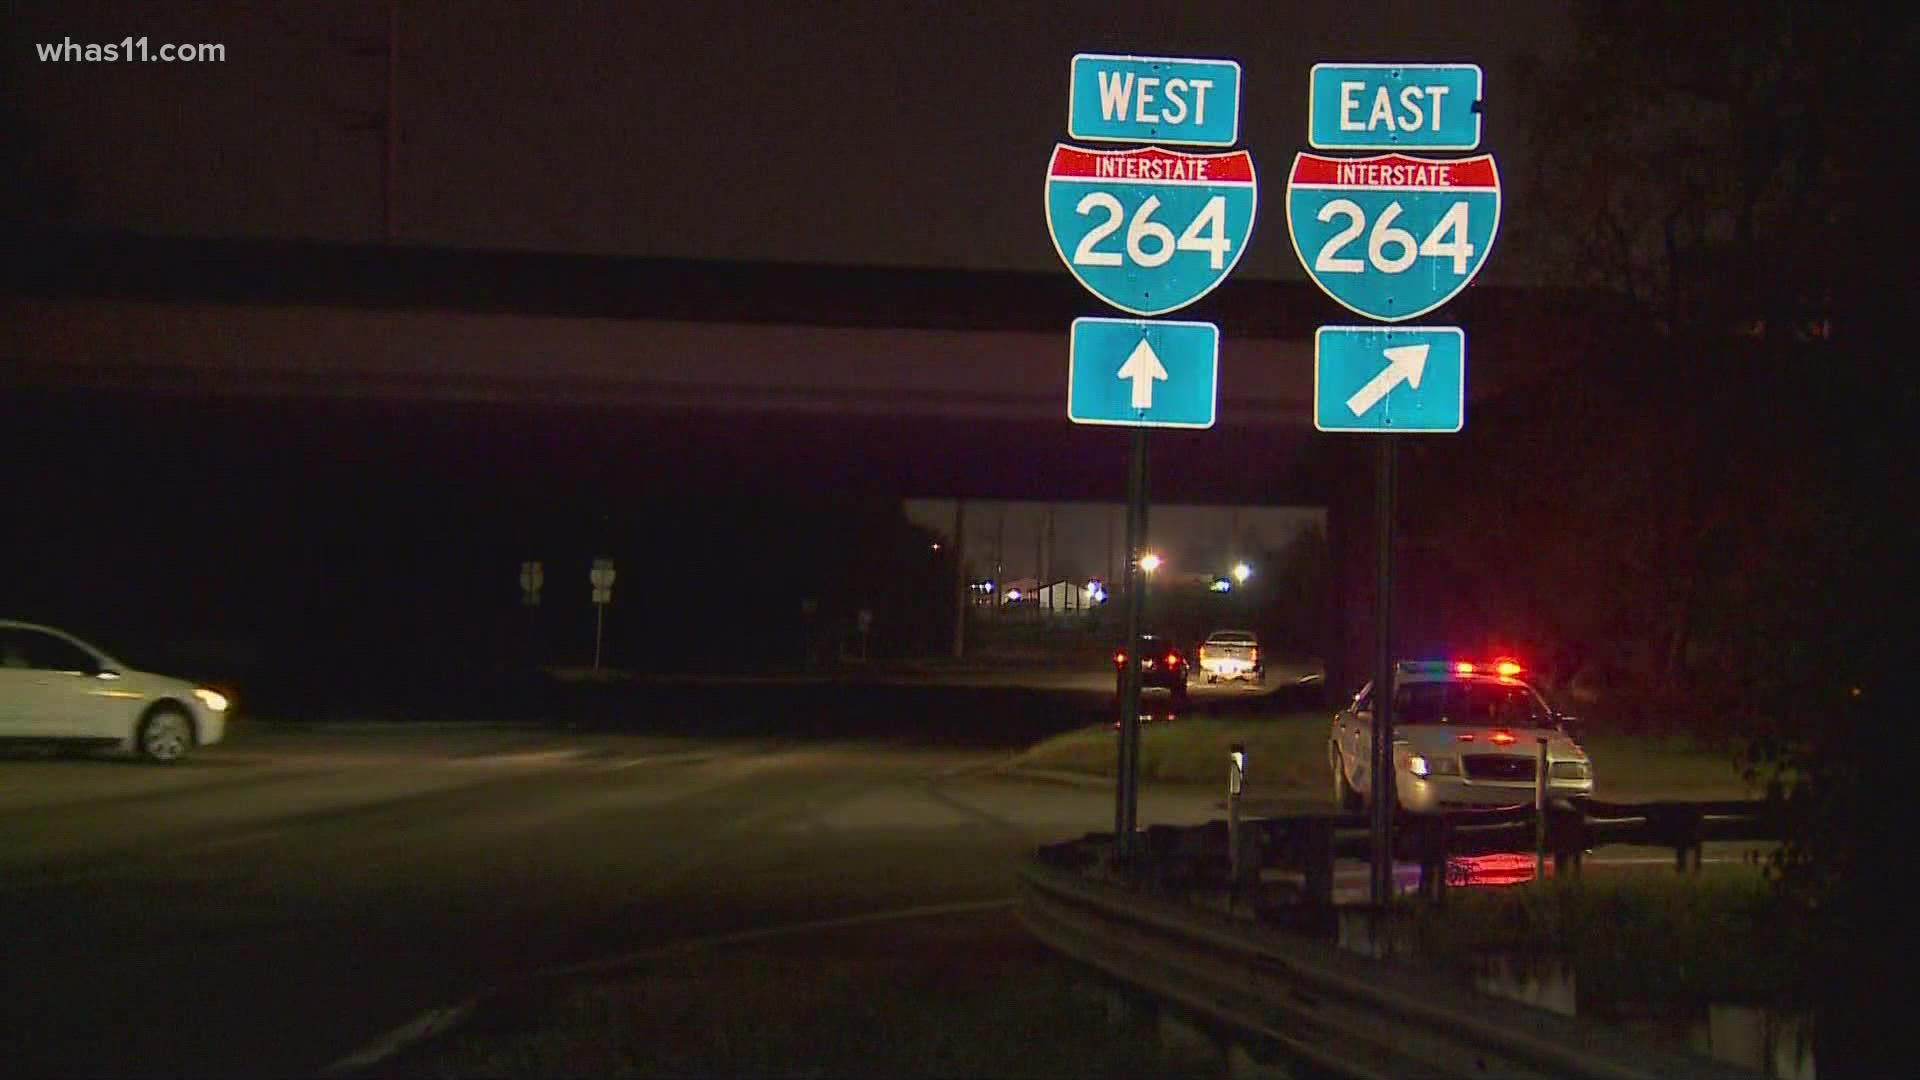 Louisville Metro Police said a vehicle was driving west in the eastbound lanes when it hit another vehicle around 3:40 a.m. Friday.